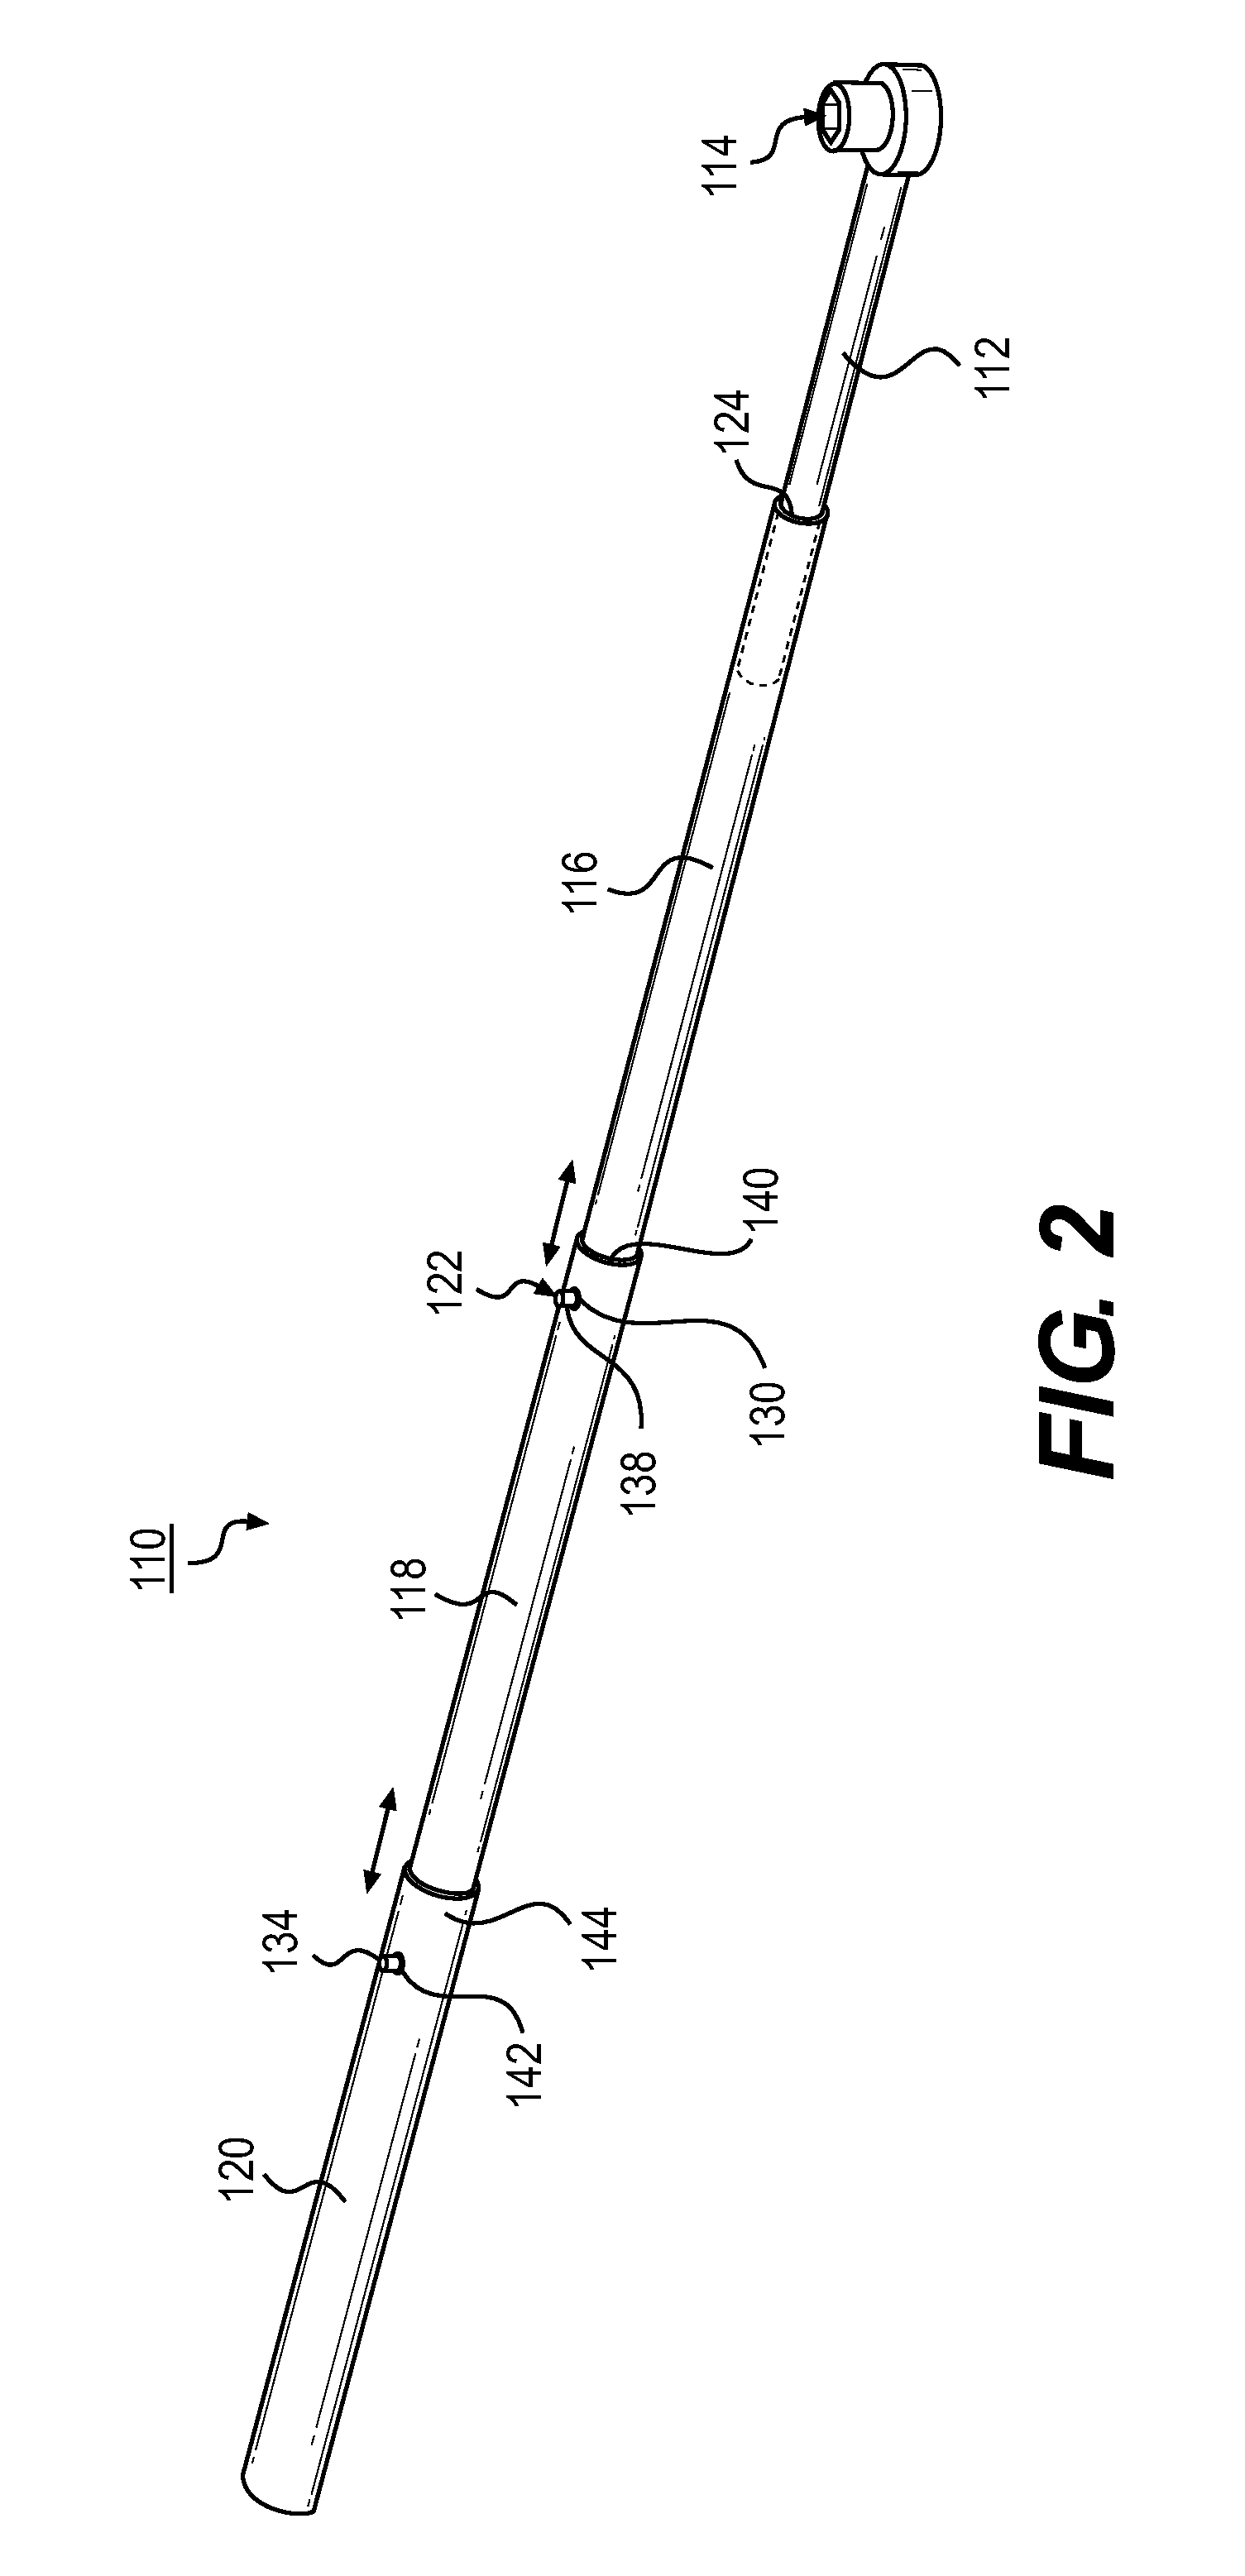 Telescopic extension device for a handle of a wrench